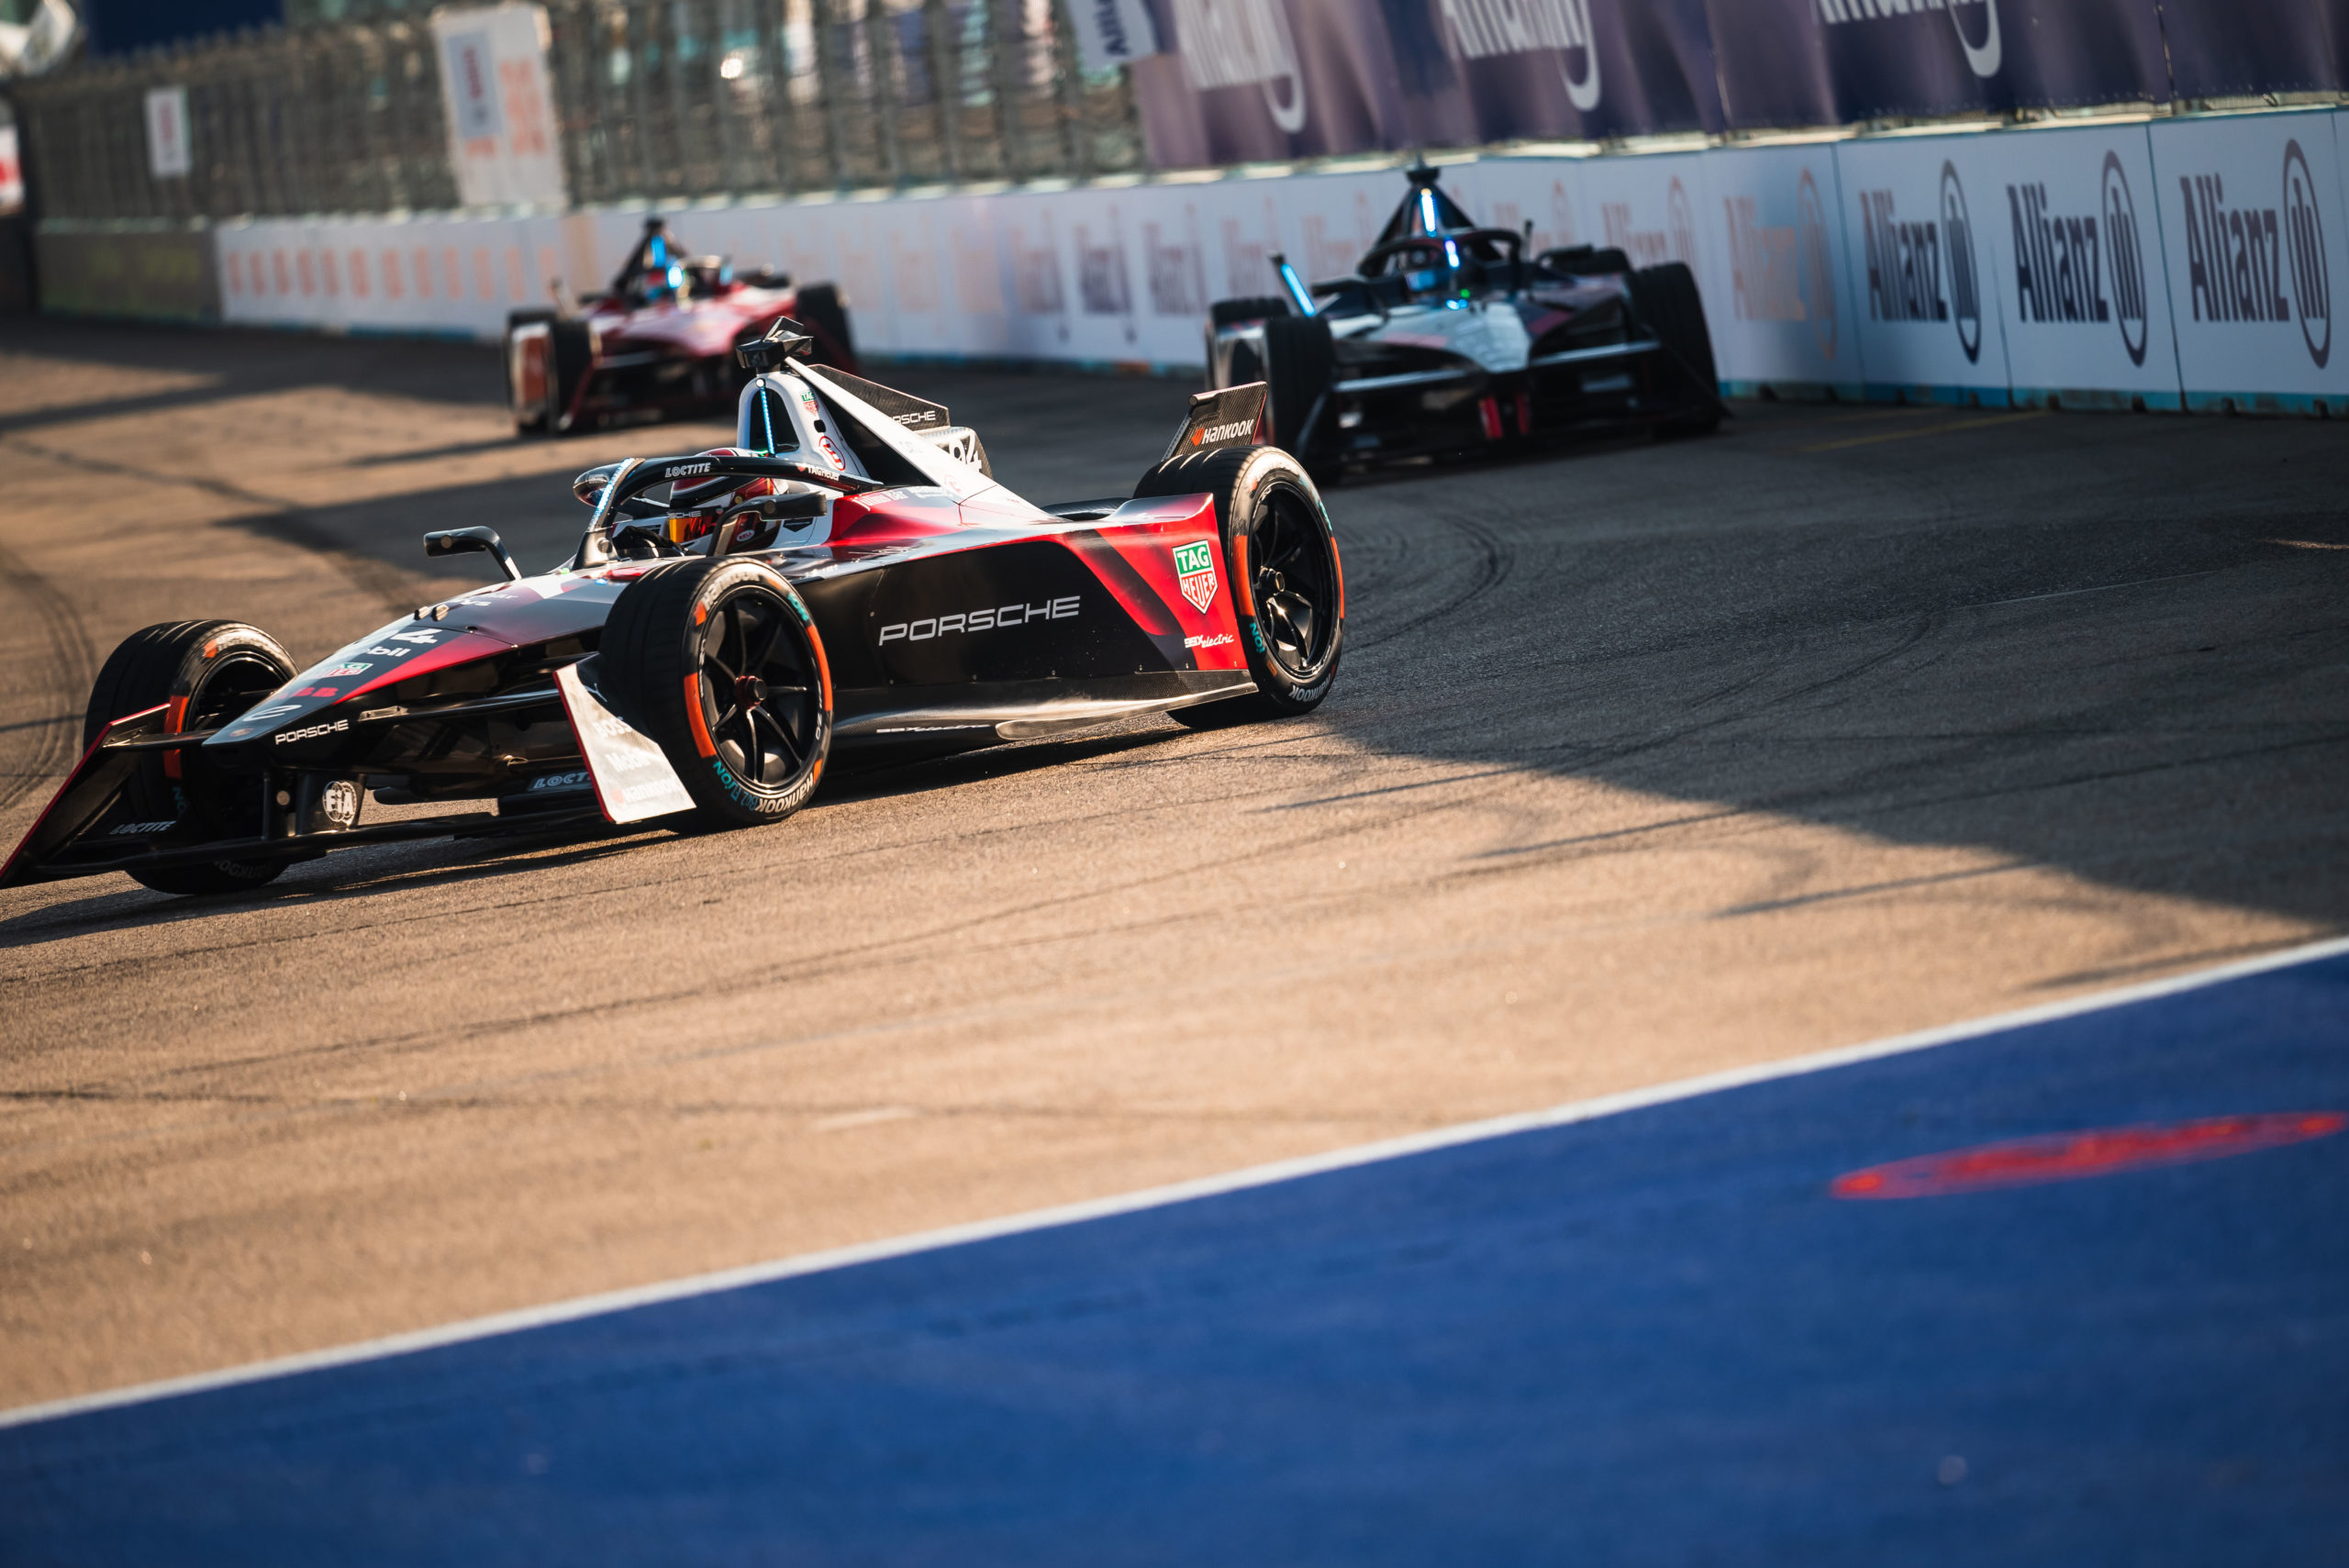 formula e points leader gets chassis change two months after shunt